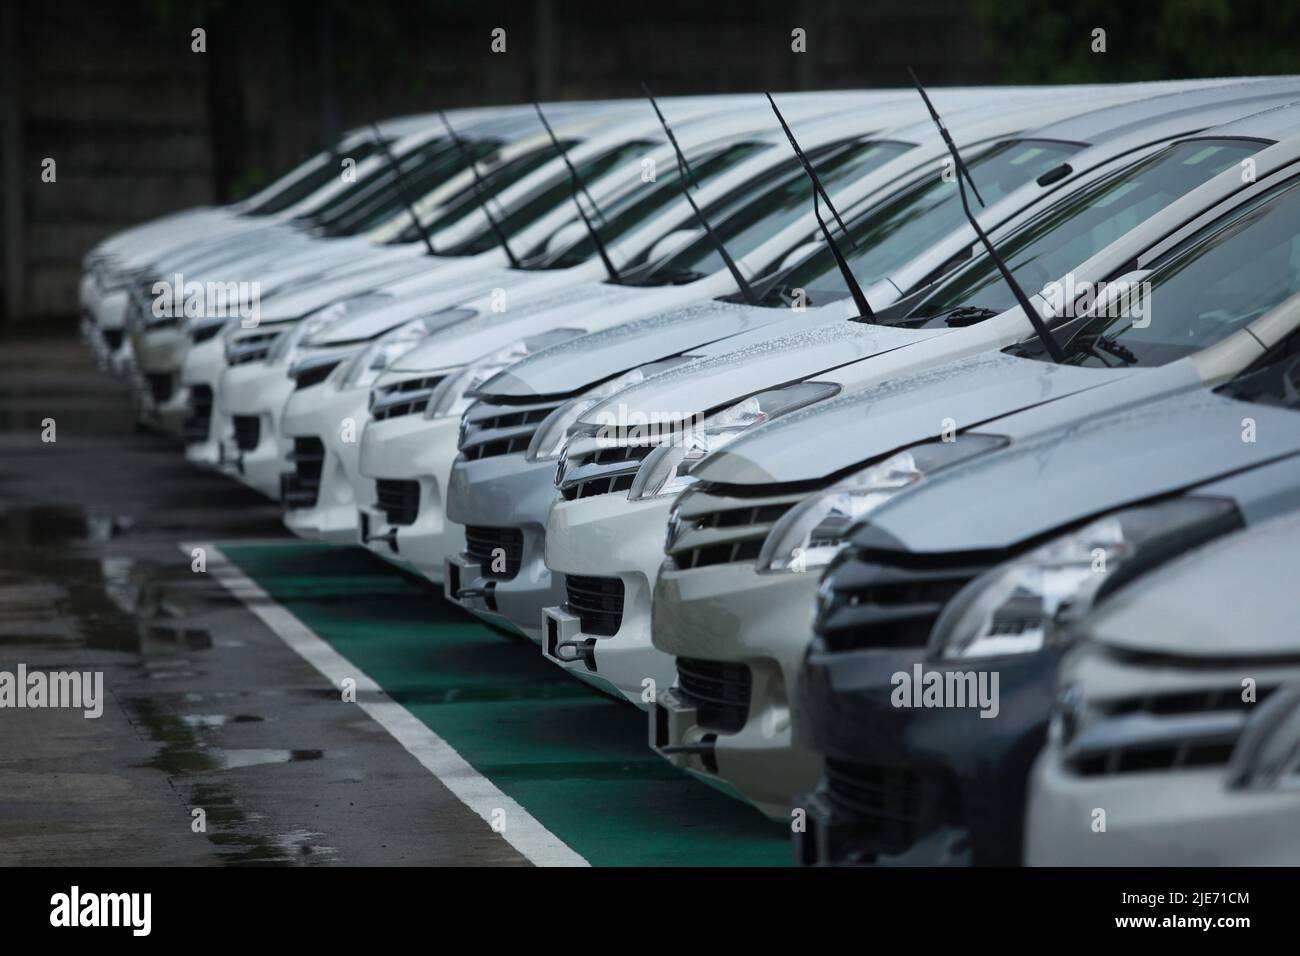 Jakarta,Indonesia-March 22,2013: selective focus on a row of new toyota avanza cars parked after being assembled at the toyota car factory in jakarta Stock Photo